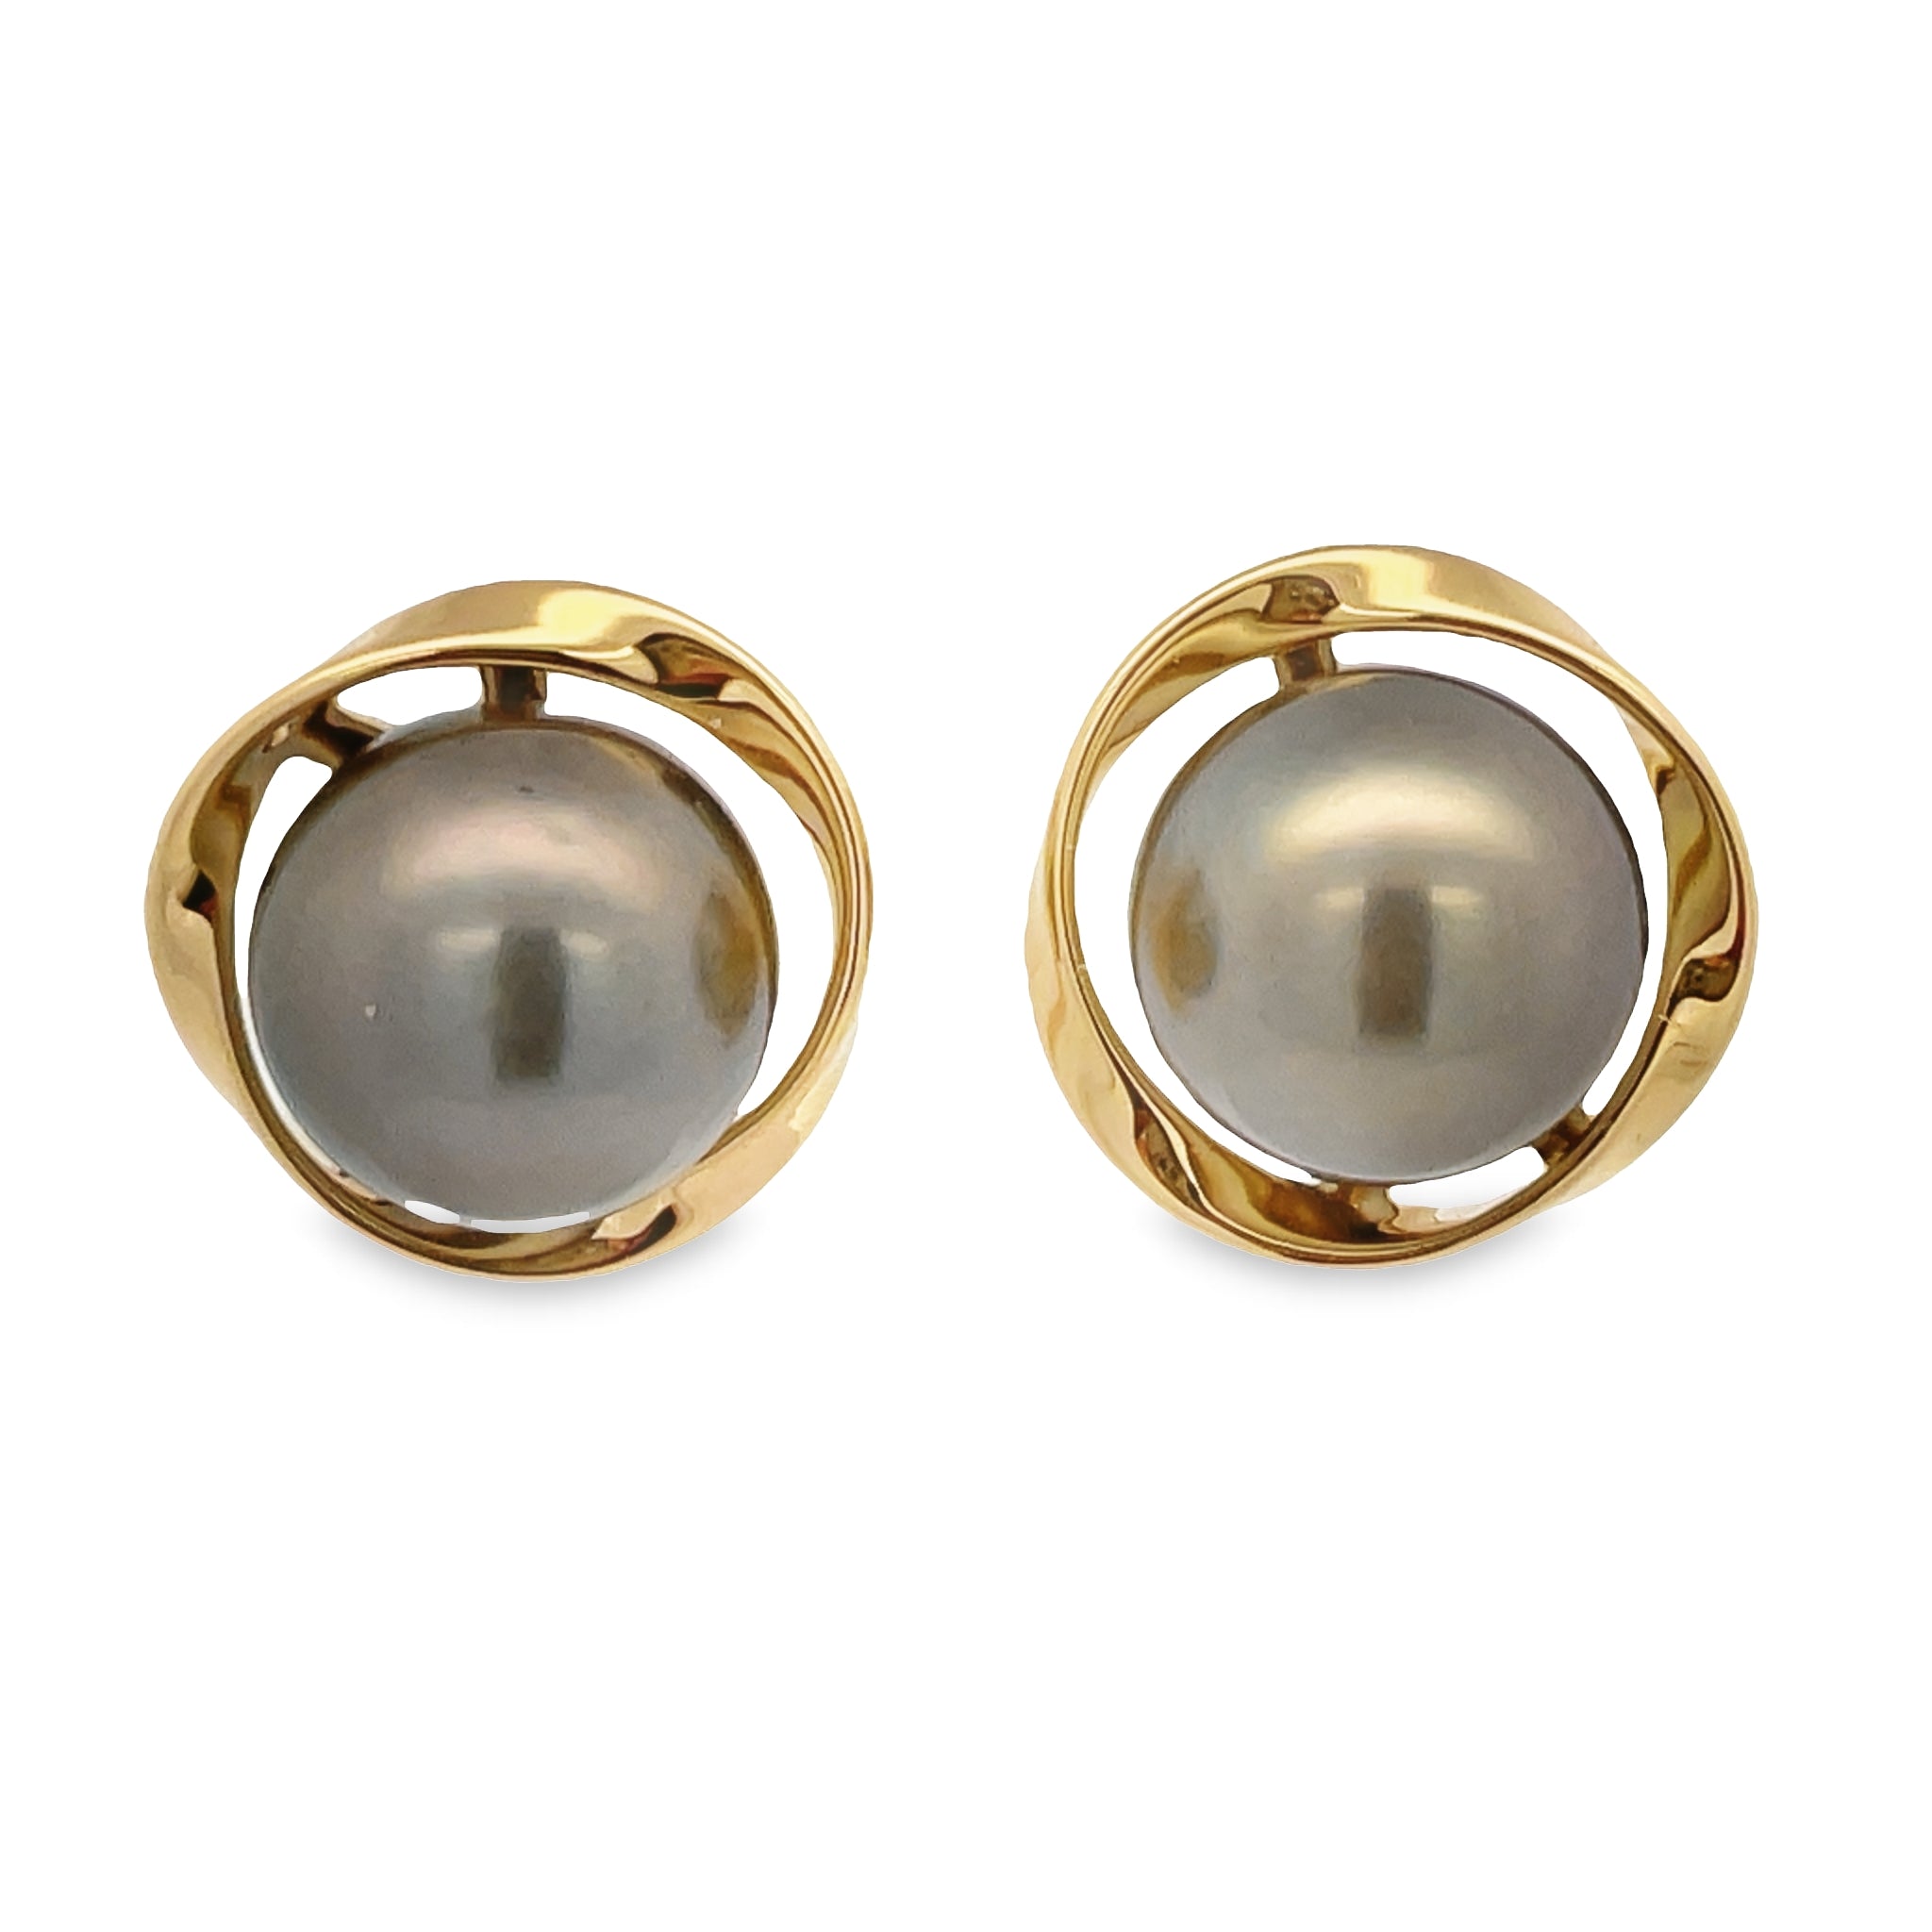 Her classic style shines with these exquisite Tahitian pearl stud earrings. Handcrafted with natural 10.00mm pearls and 18k yellow gold trim, these beautiful earrings are perfect for any occasion. Add an elegant touch to your wardrobe.